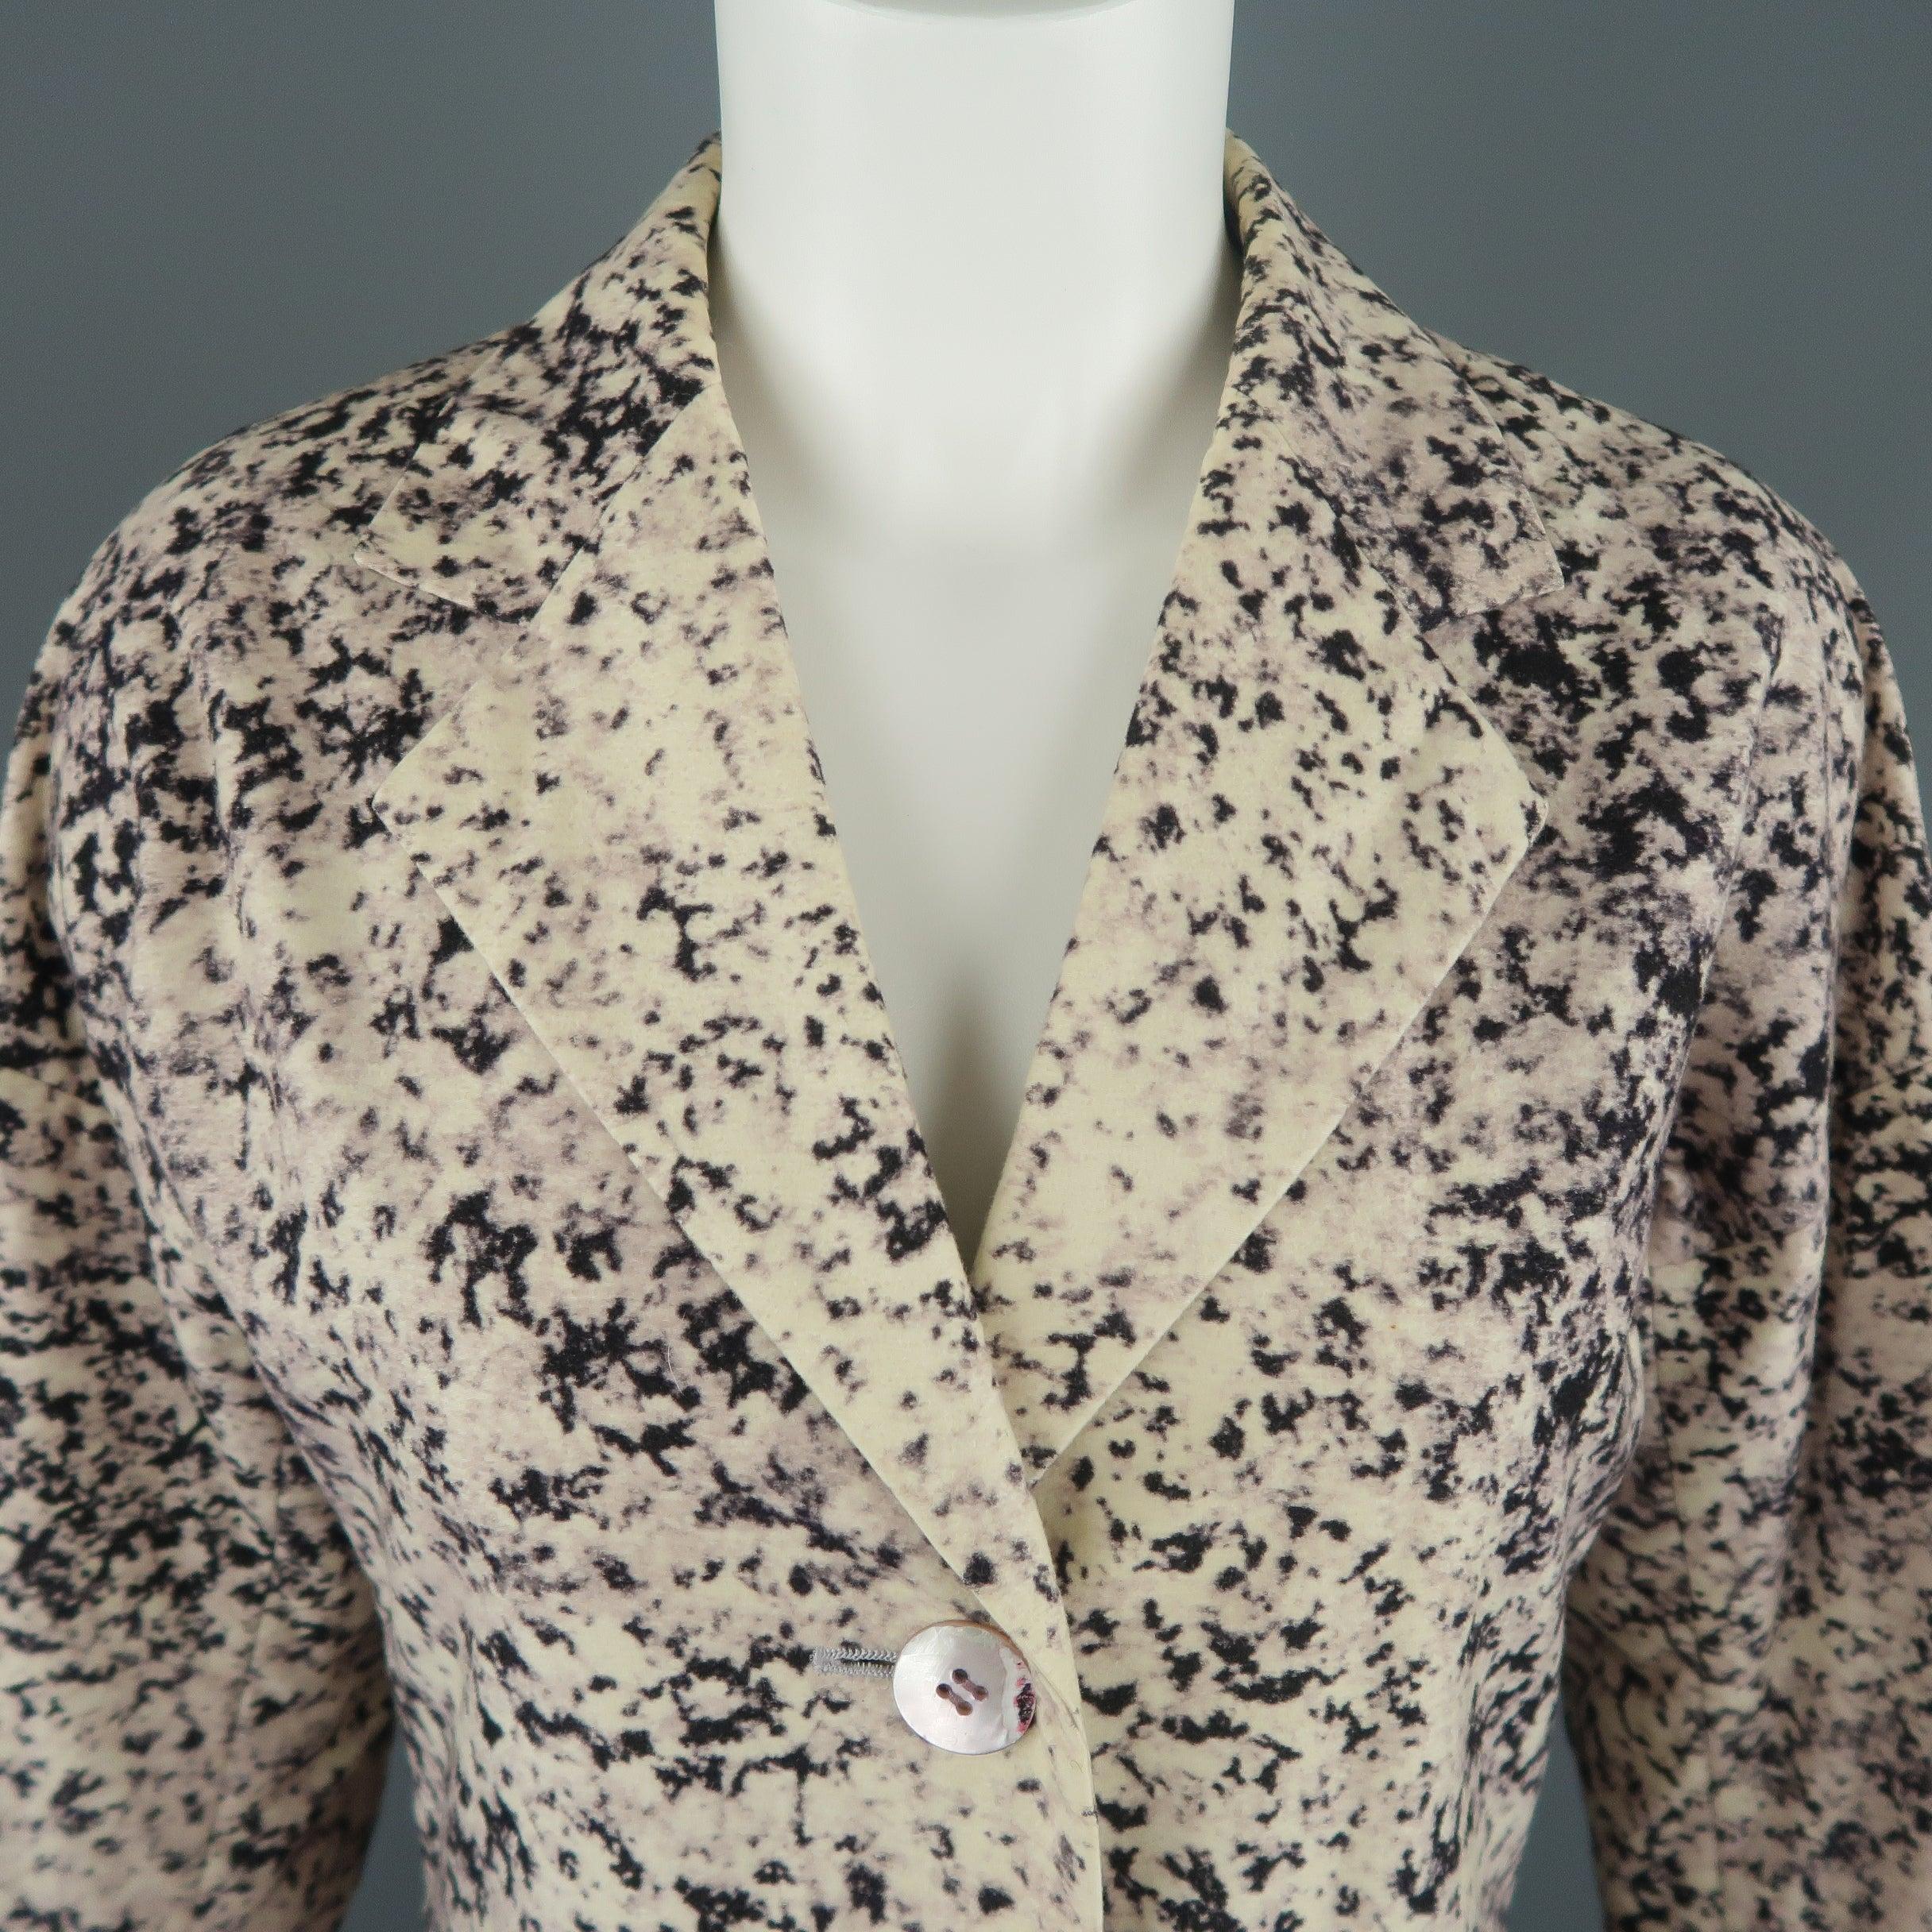 Vintage ISSEY MIYAKE jacket comes in beige purple and black marble print felt with a notch lapel, two button front, slit pockets, drop shoulder, and nylon liner. Made in Italy.
Very Good Pre-Owned Condition.
 

Marked:   (no size)
 

Measurements: 
